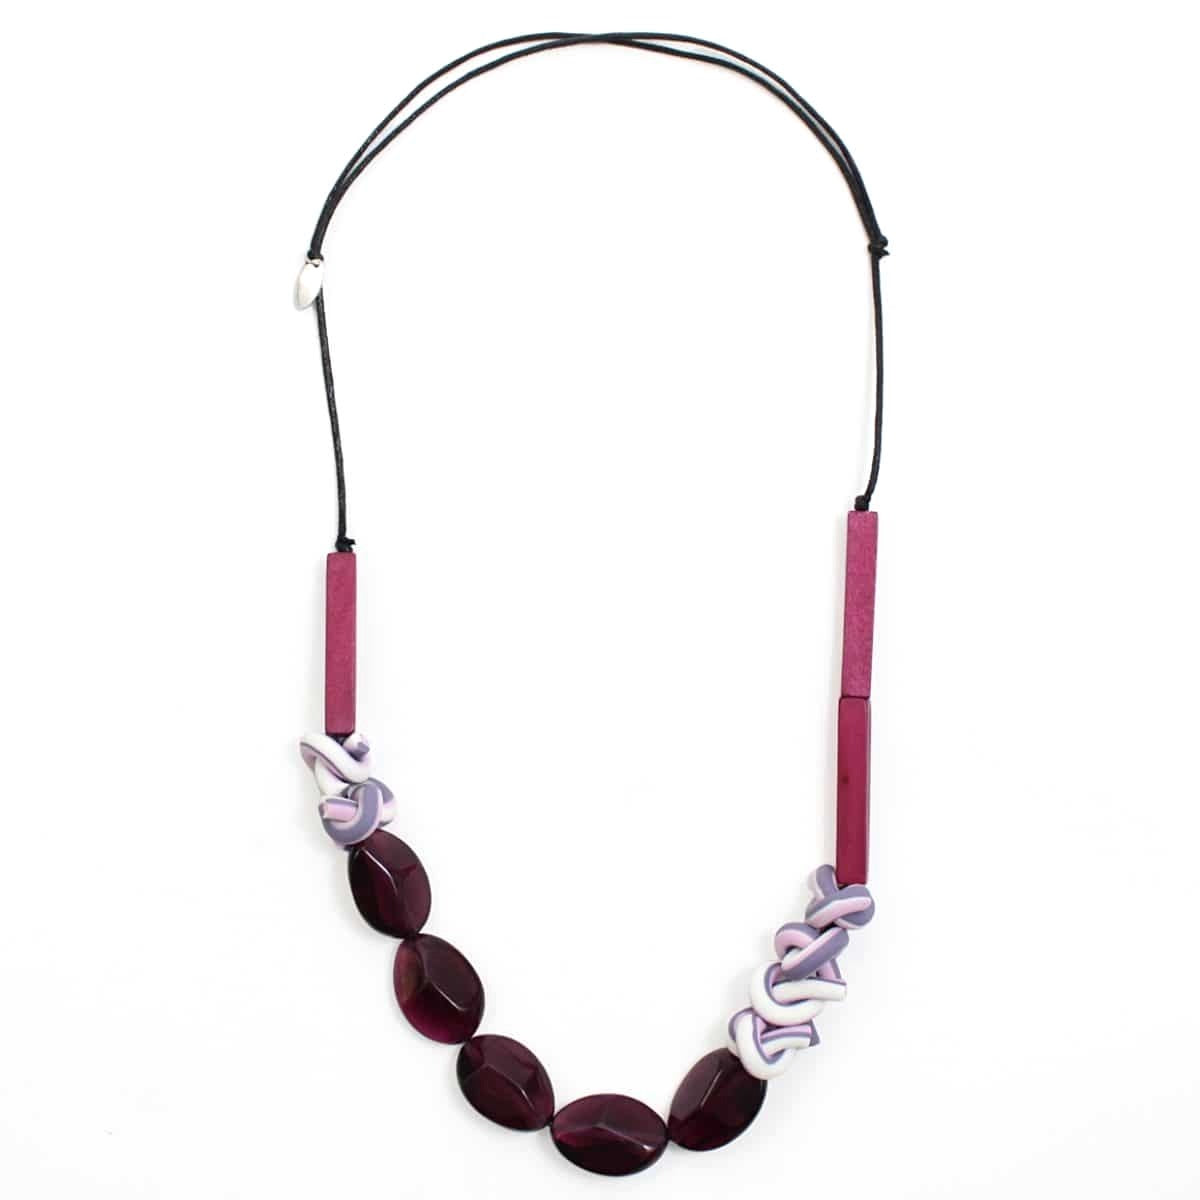 Shades of Purple Shea Necklace by Sylca Designs